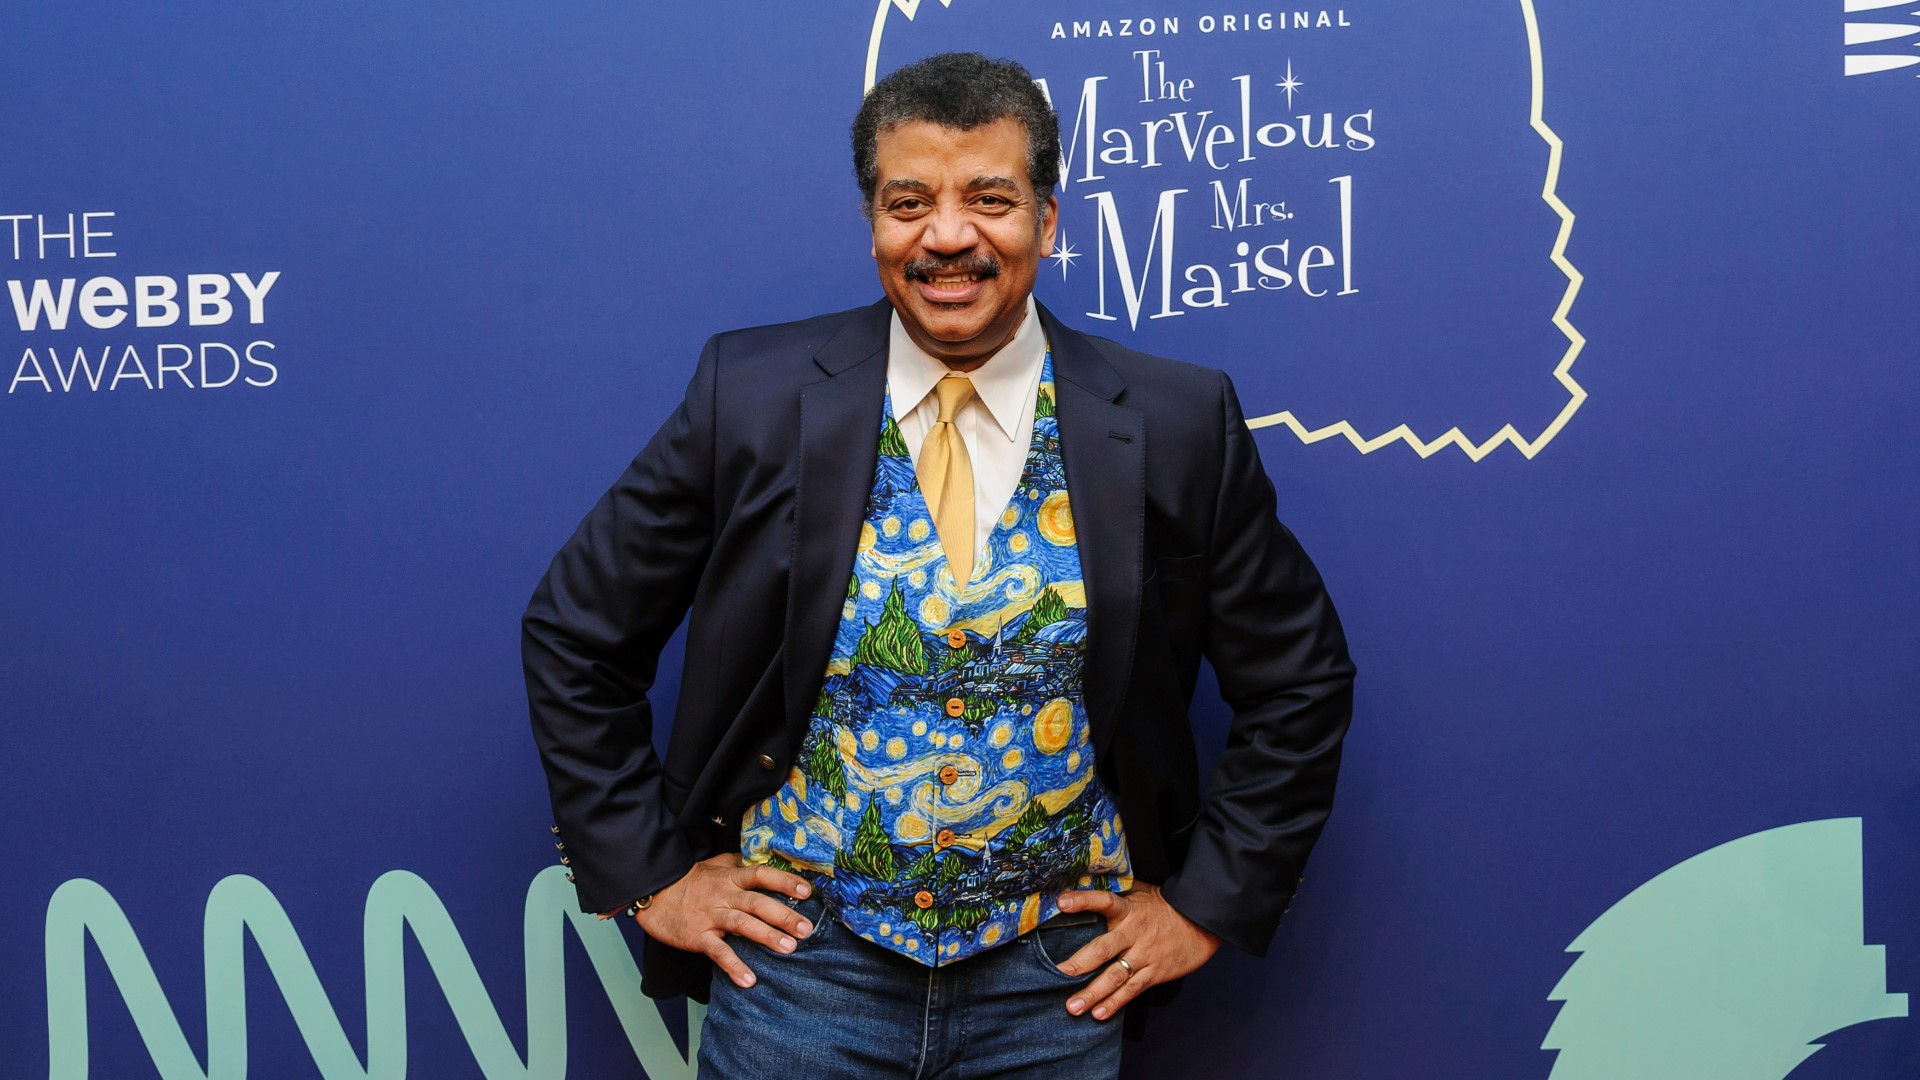 Neil deGrasse Tyson "plays" the Paramount Theatre for two nights next week. #k5evening